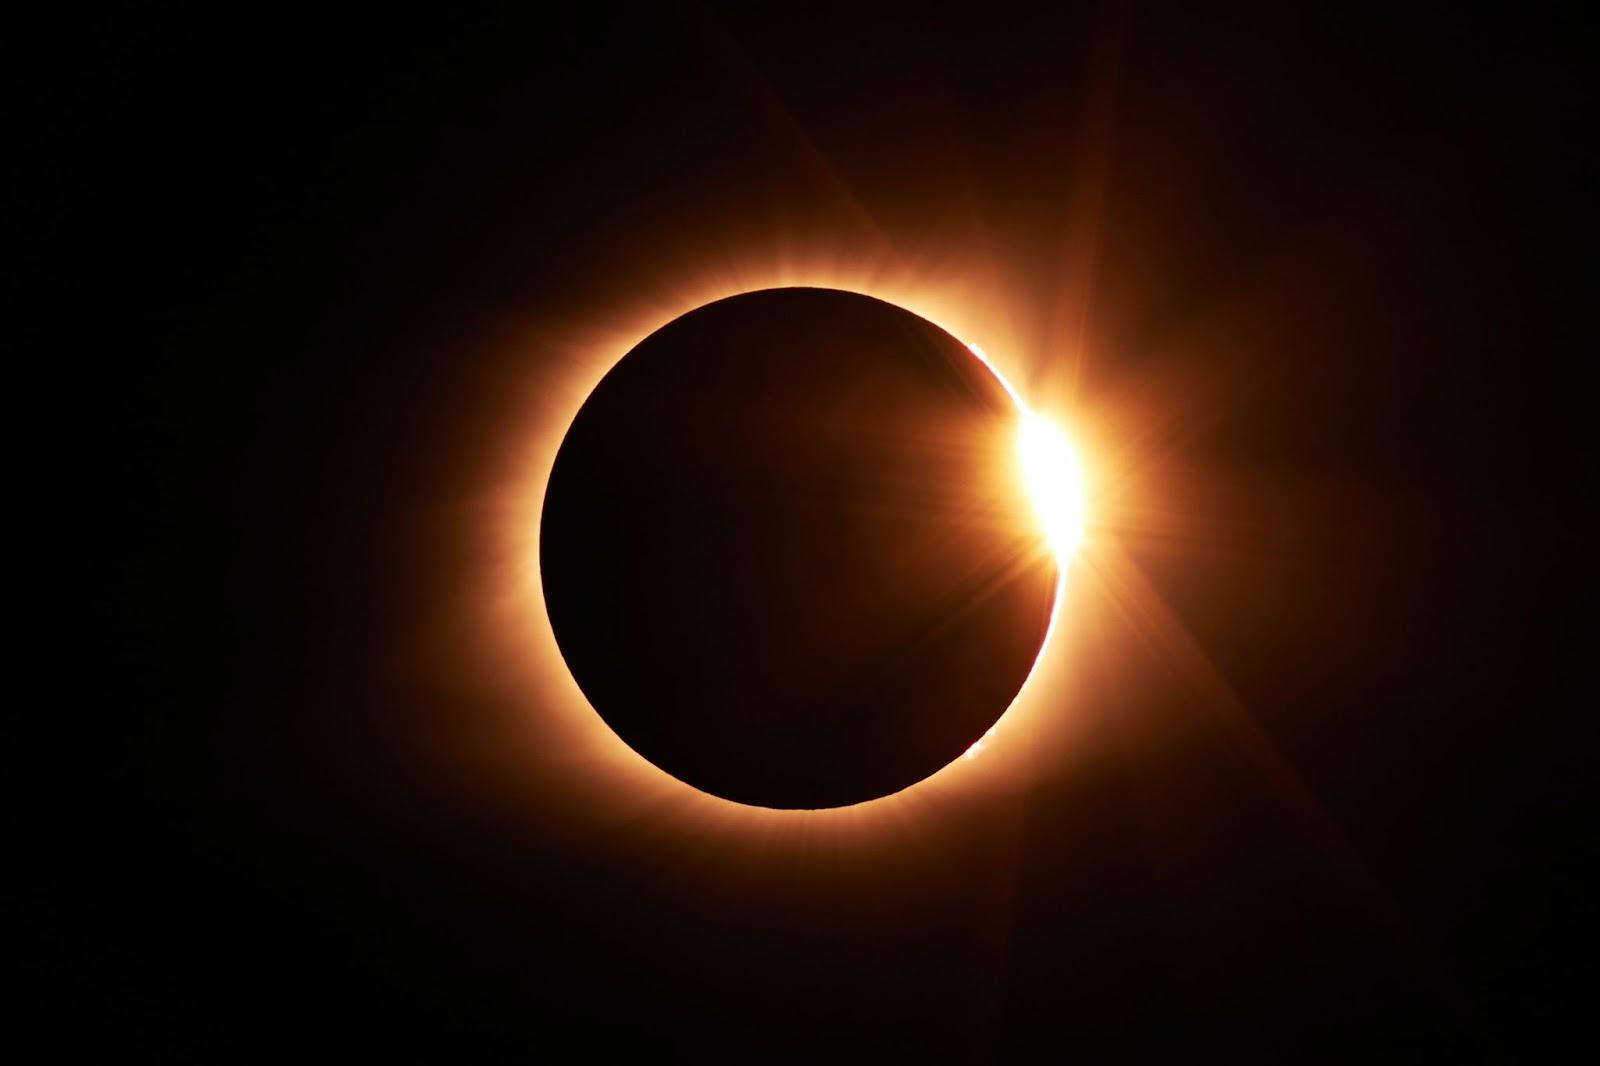 An eclipse on a black background